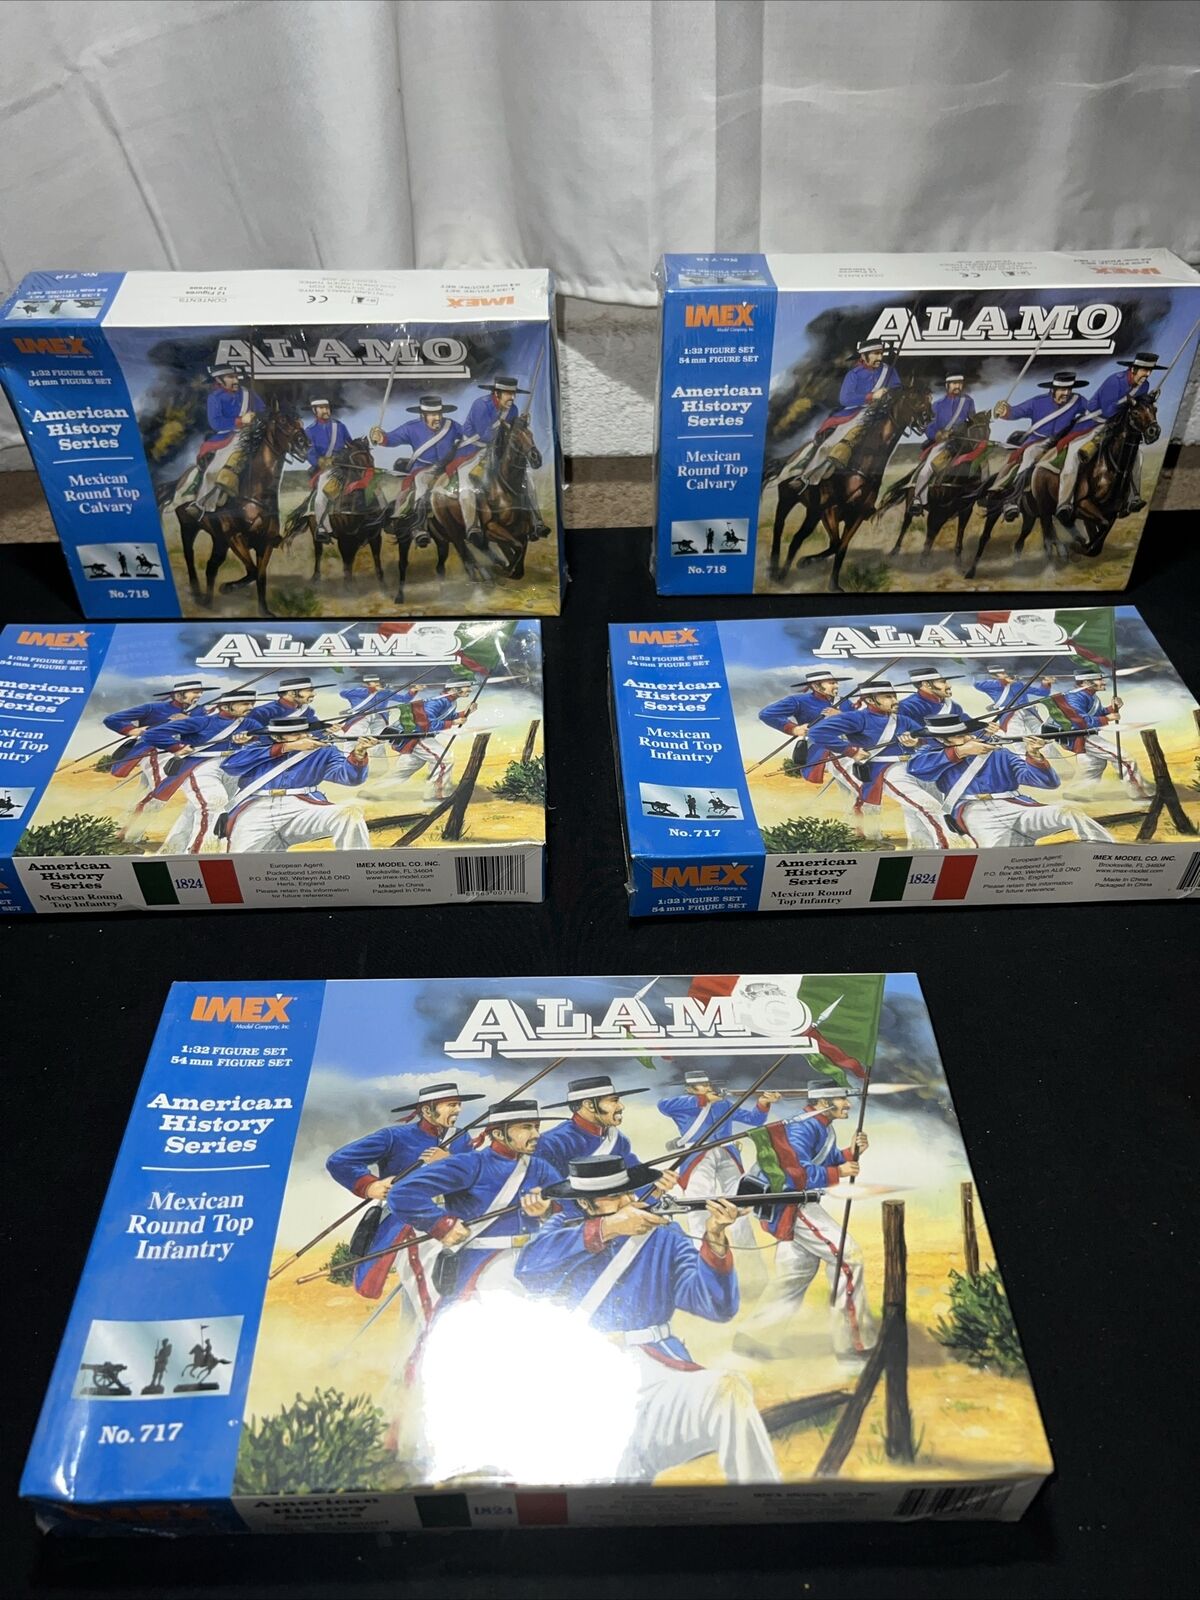 Imex Alamo Mexican Round Top Cavalry Soldier Set in box 1/32 #718 & #717 Lot 5